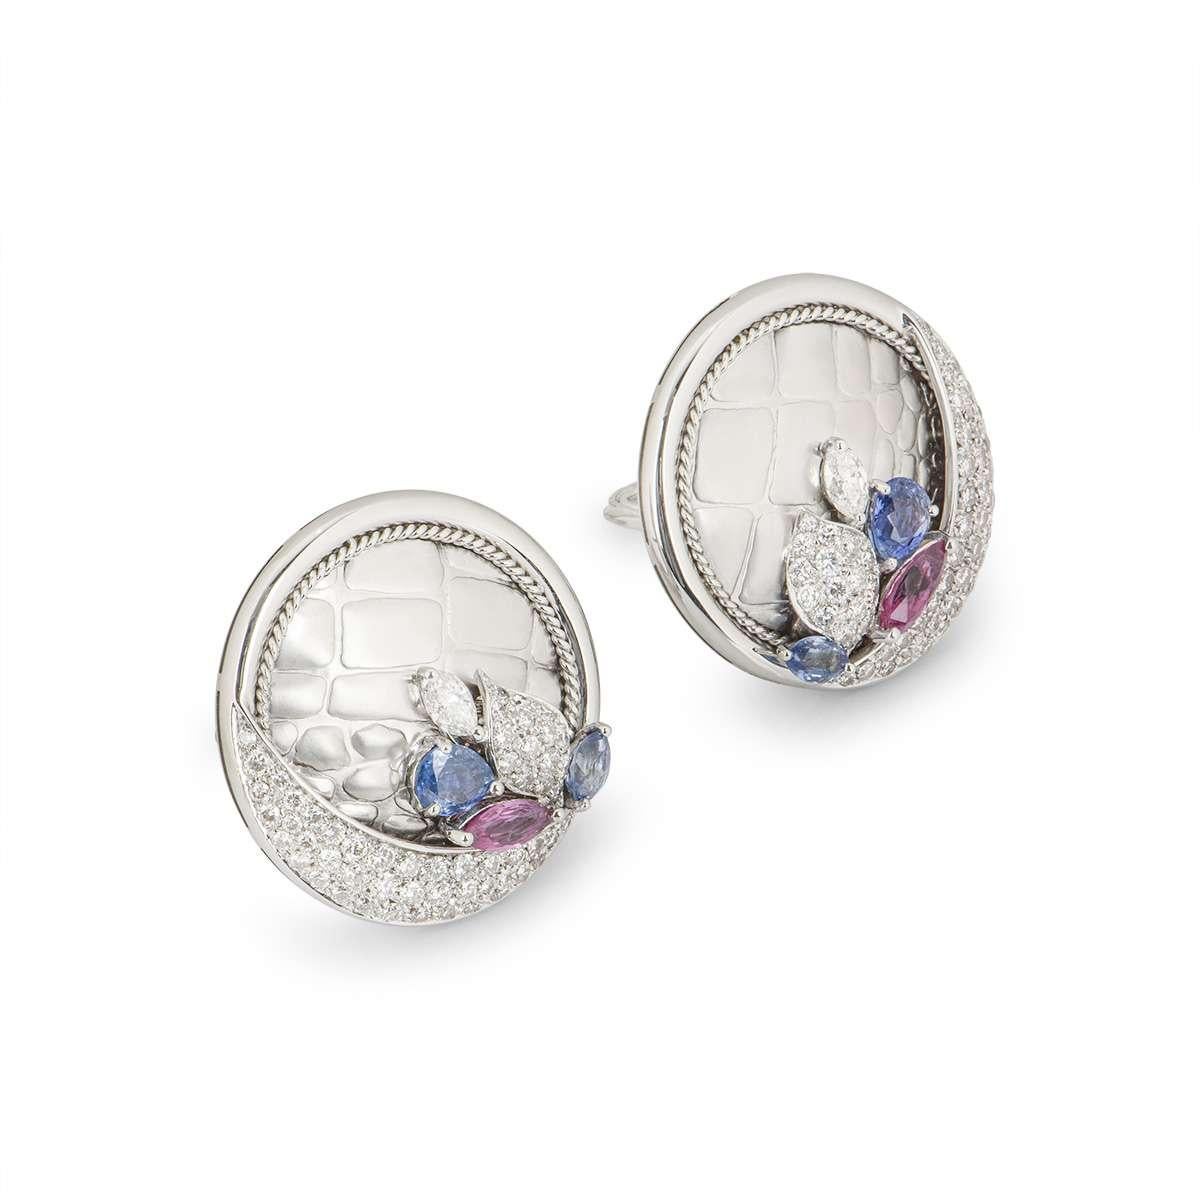 A pair of 18k white gold diamond, sapphire and ruby earrings. The earrings are set with round brilliant cut diamonds and a marquise cut diamond totalling approximately 3.04ct. Complementing the diamonds is a single ruby totalling approximately